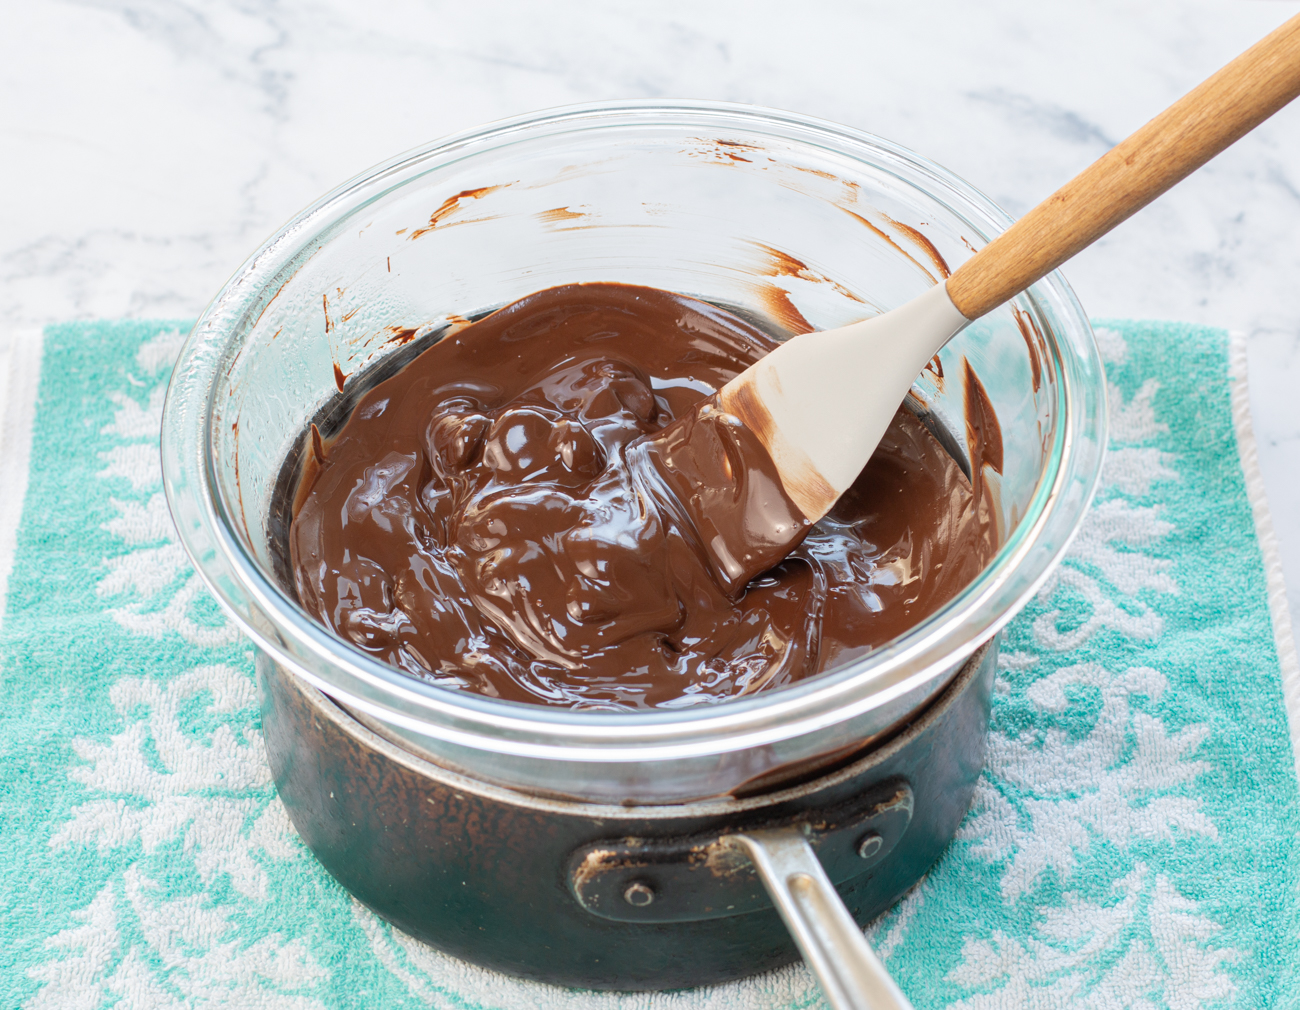 The first step: melt chocolate in a bain-marie over just simmering water 